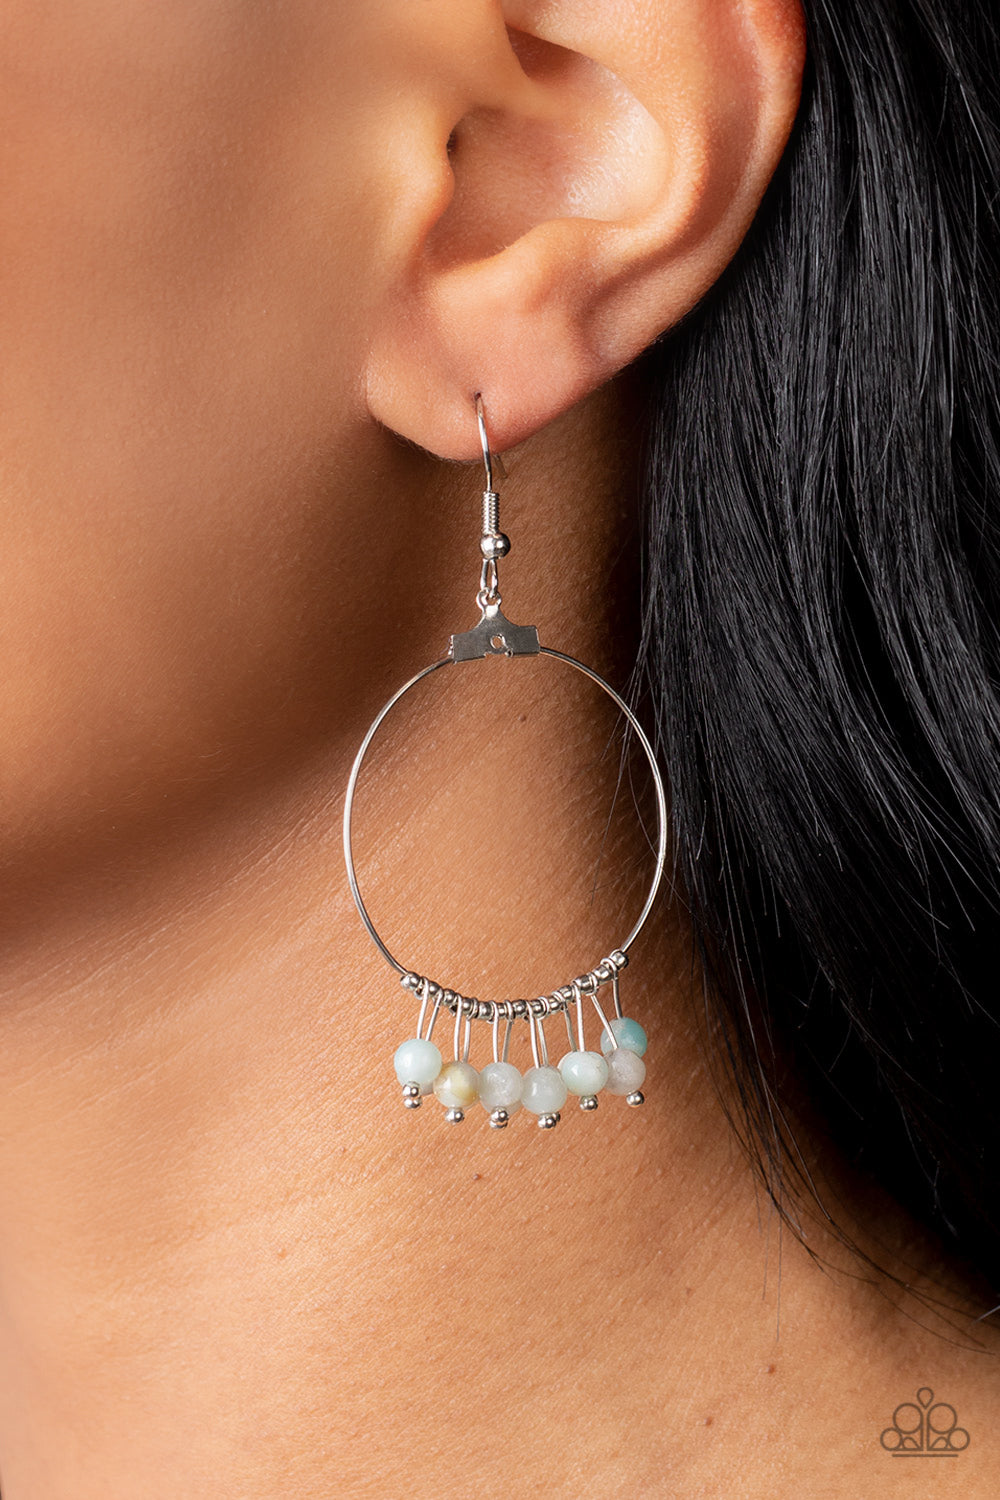 Paparazzi Accessories: Free Your Soul - Multi Earrings